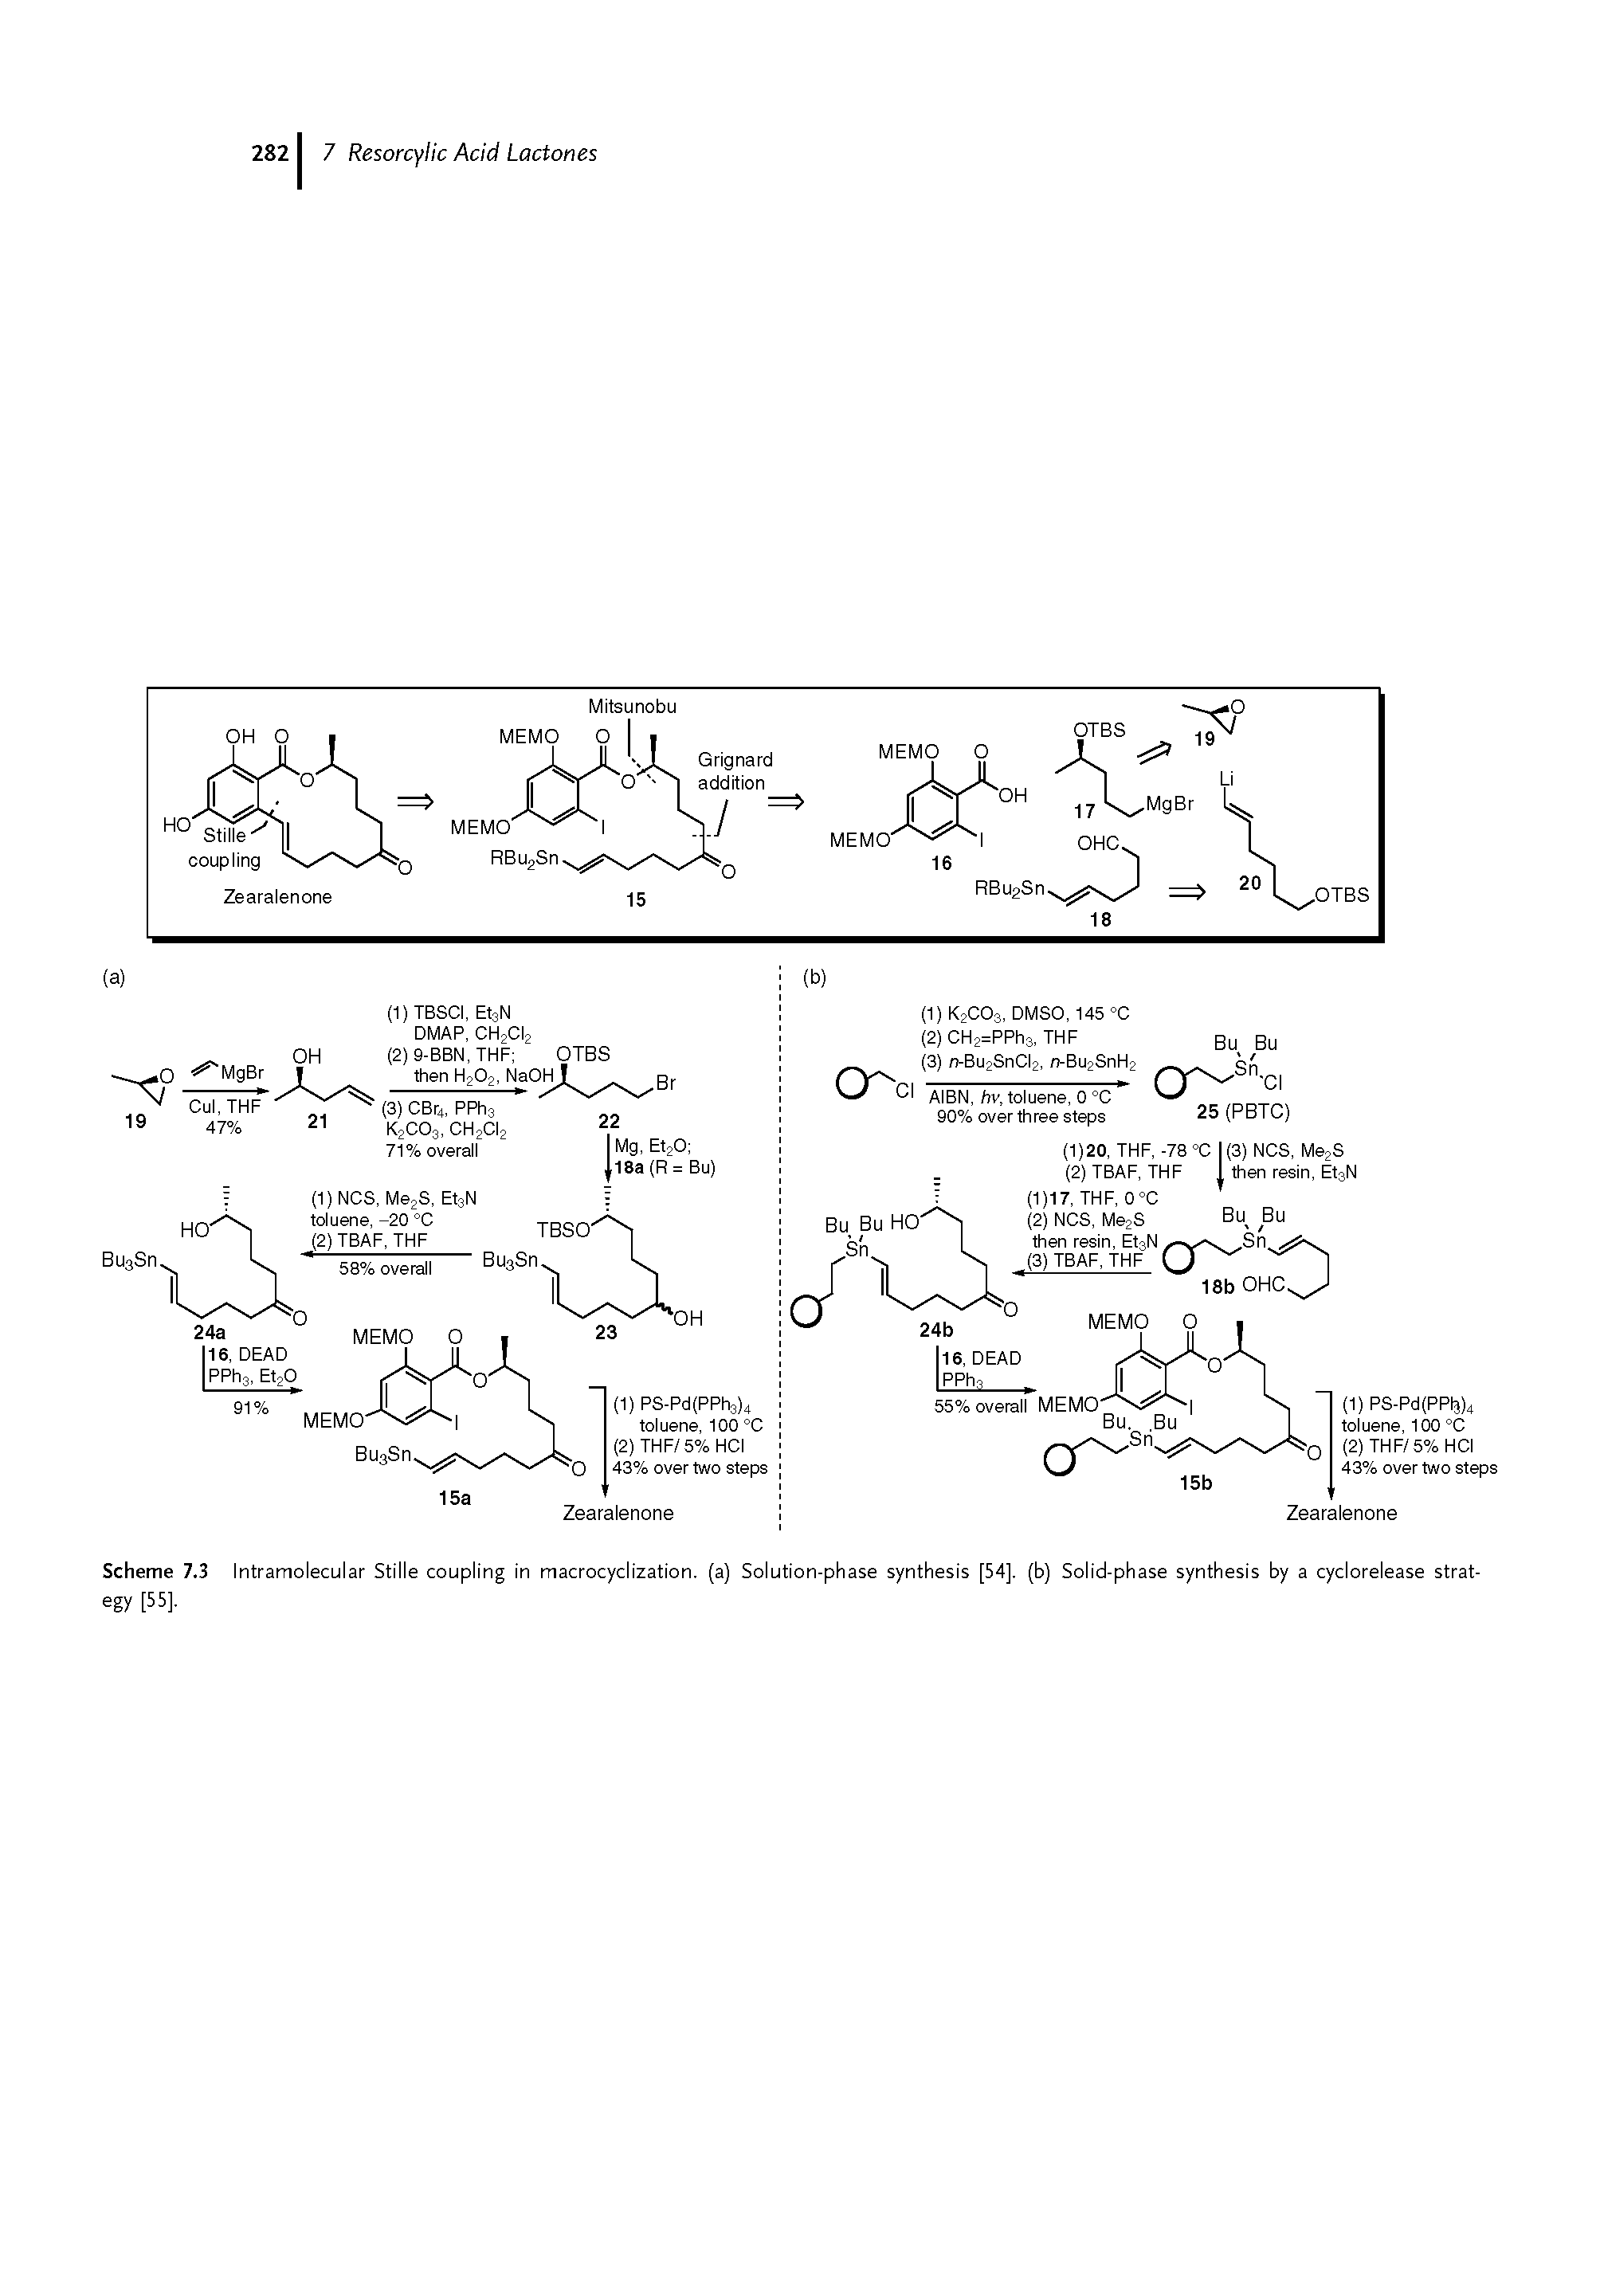 Scheme 7.3 Intramolecular Stille coupling in macrocyclization. (a) Solution-phase synthesis [54]. (b) Solid-phase synthesis by a cyclorelease strategy [55].